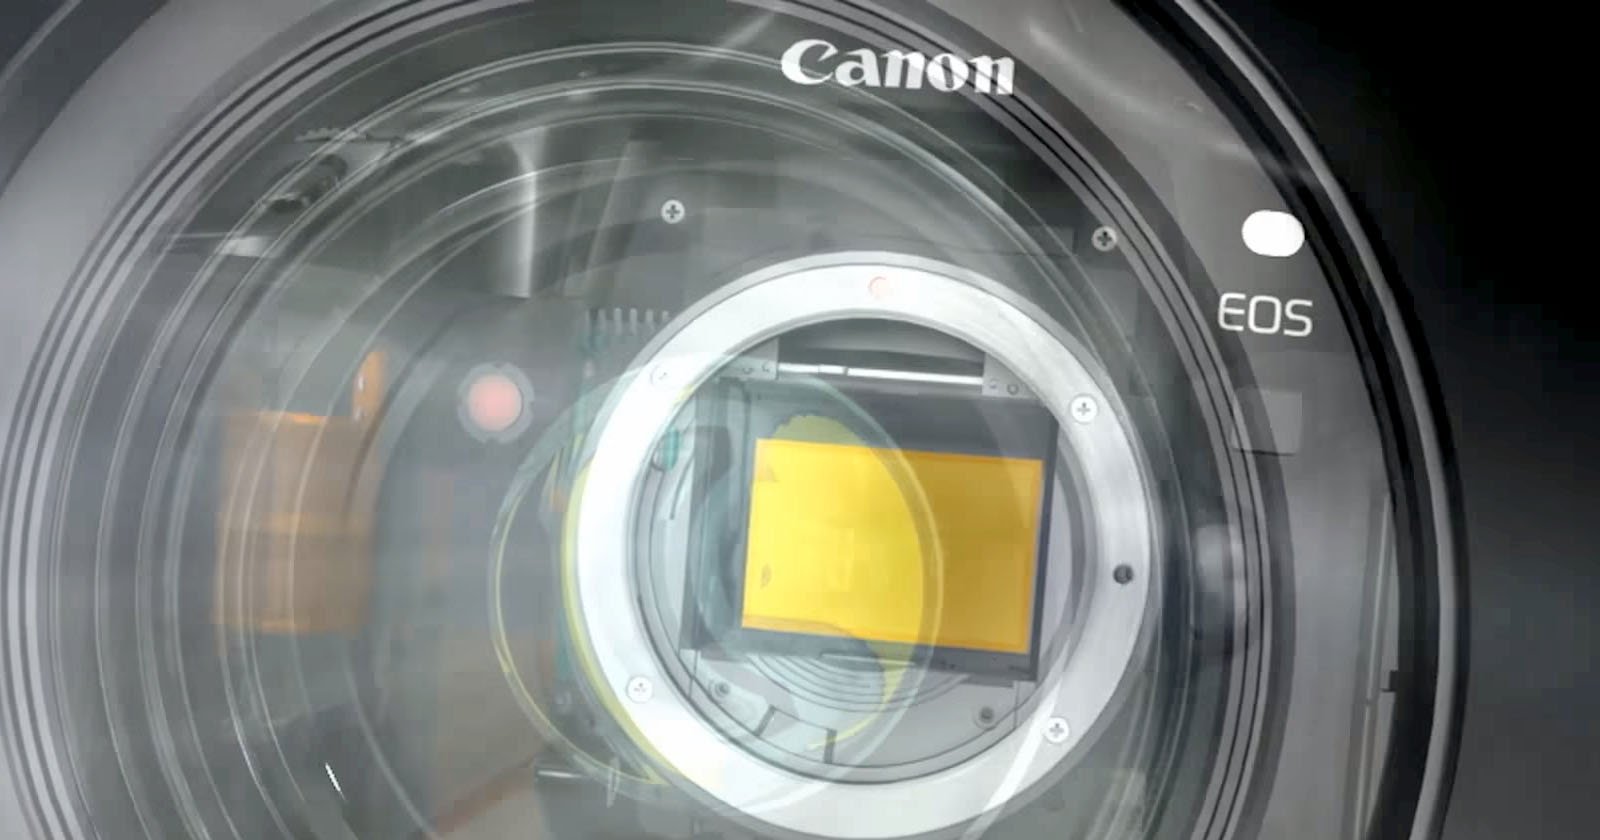 Watch Canon’s Ultra-Dramatic Video Showing Off Its Sensors of the Future